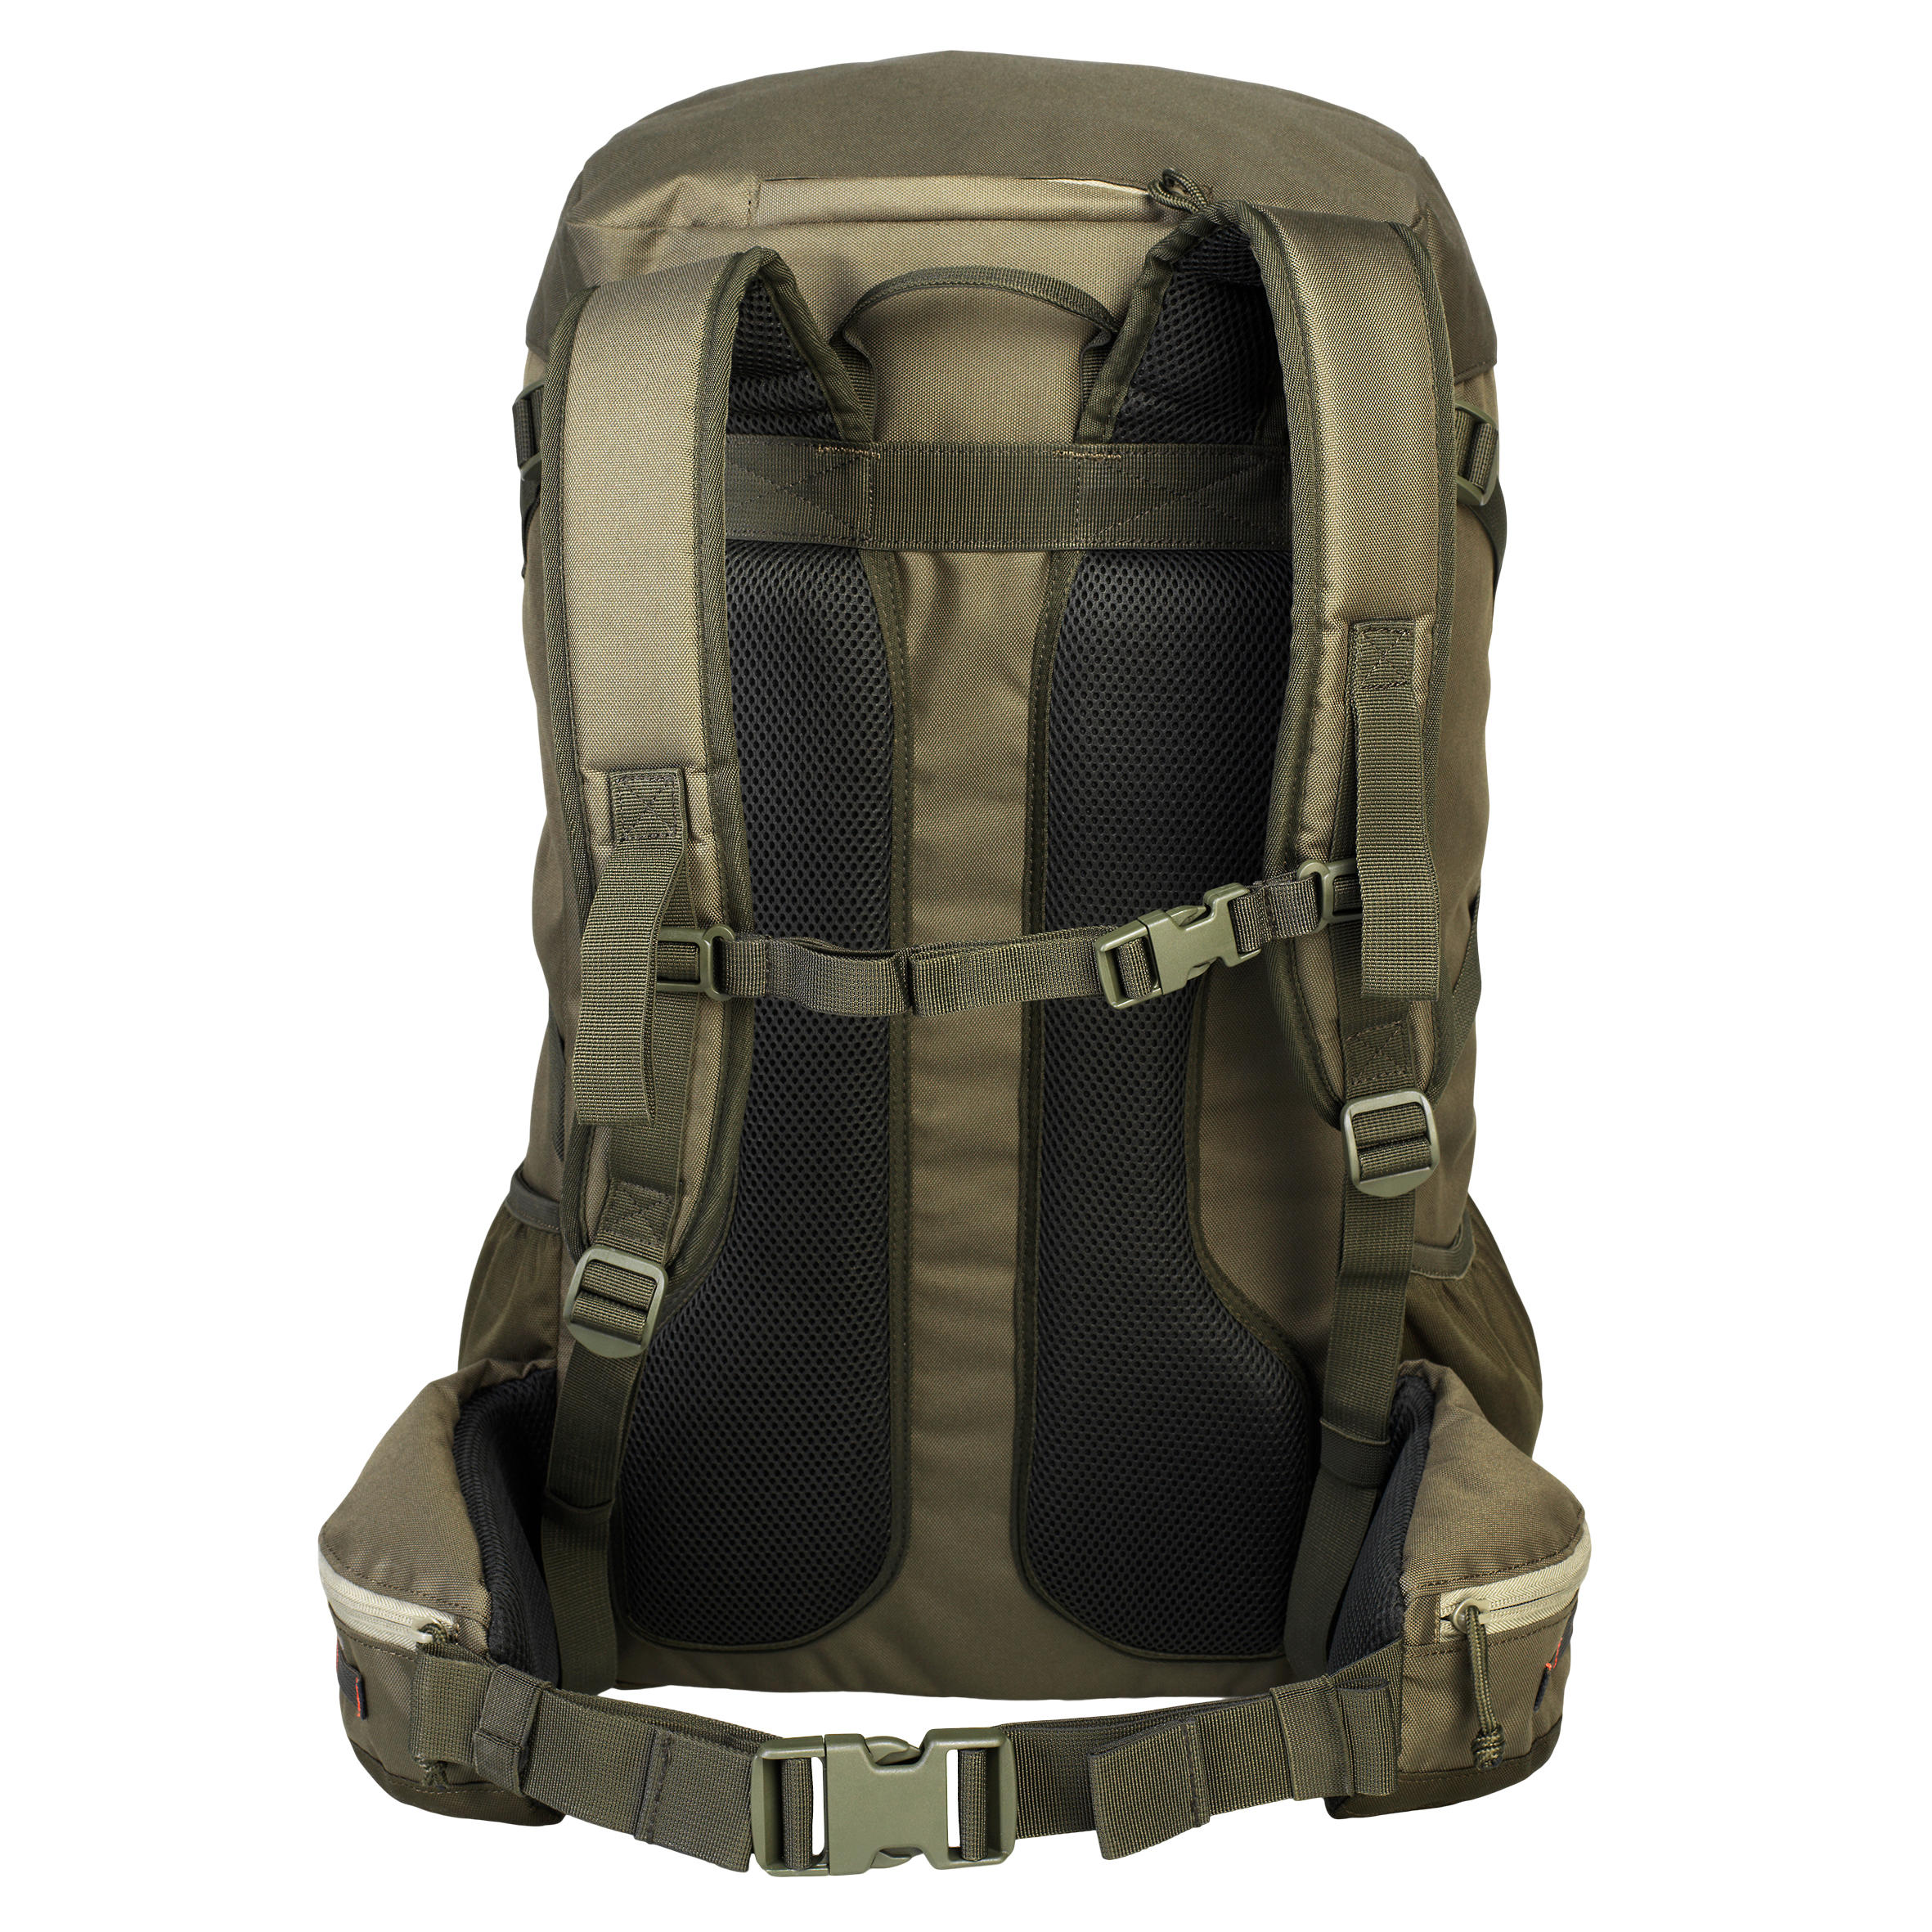 50L Backpack for Camping - Green 5/16